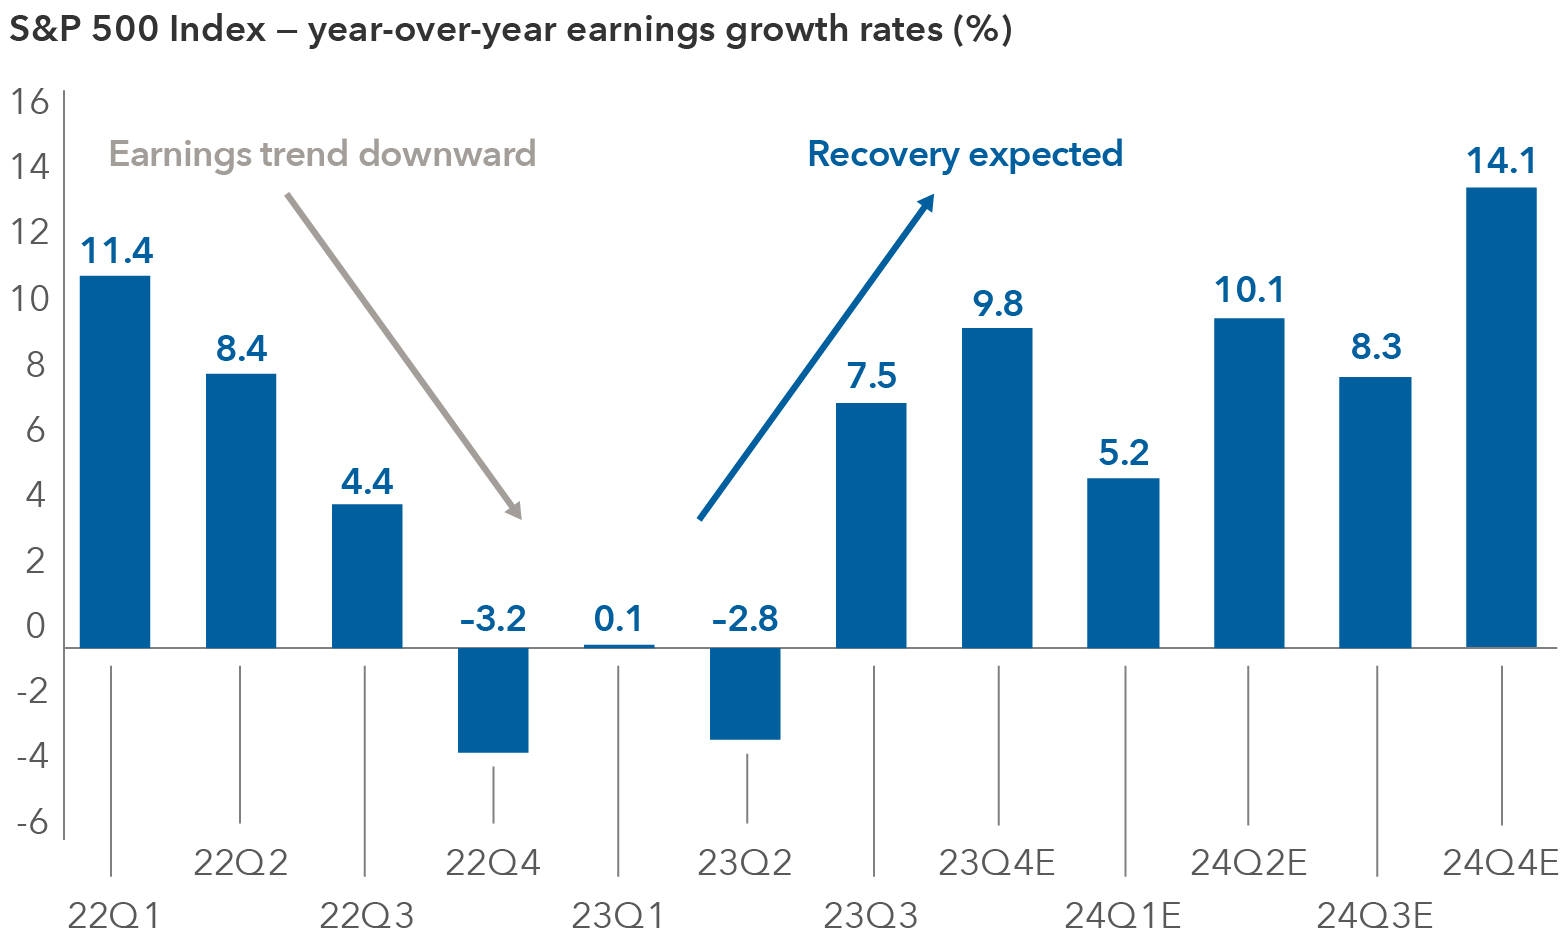 The bar chart displays year-over-year earnings growth rates for the S&P 500 Index. Beginning in the first quarter of 2022, earnings began trending downward until the third quarter of 2023, where a rising trend throughout 2024 is expected. The percentage growth rates are as follows beginning in the first quarter of 2022, until the fourth quarter of 2024: 11.4%, 8.4%, 4.4%, -3.2%, 0.1%, -2.8%, 7.5%, 9.8%, 5.2%, 10.1%, 8.3% and 14.1%. 